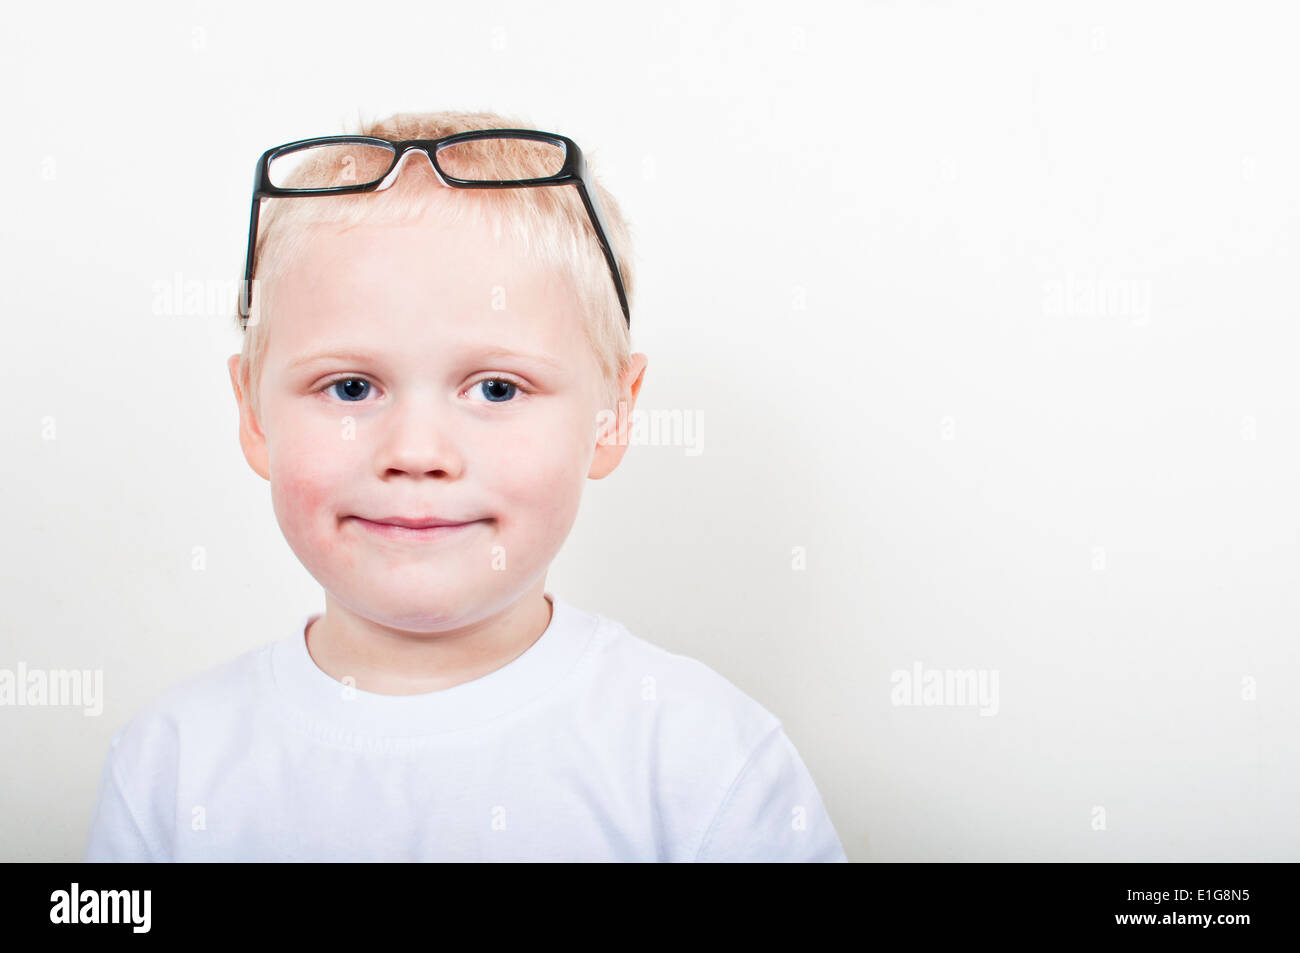 Smiling boy with glasses on his head Stock Photo